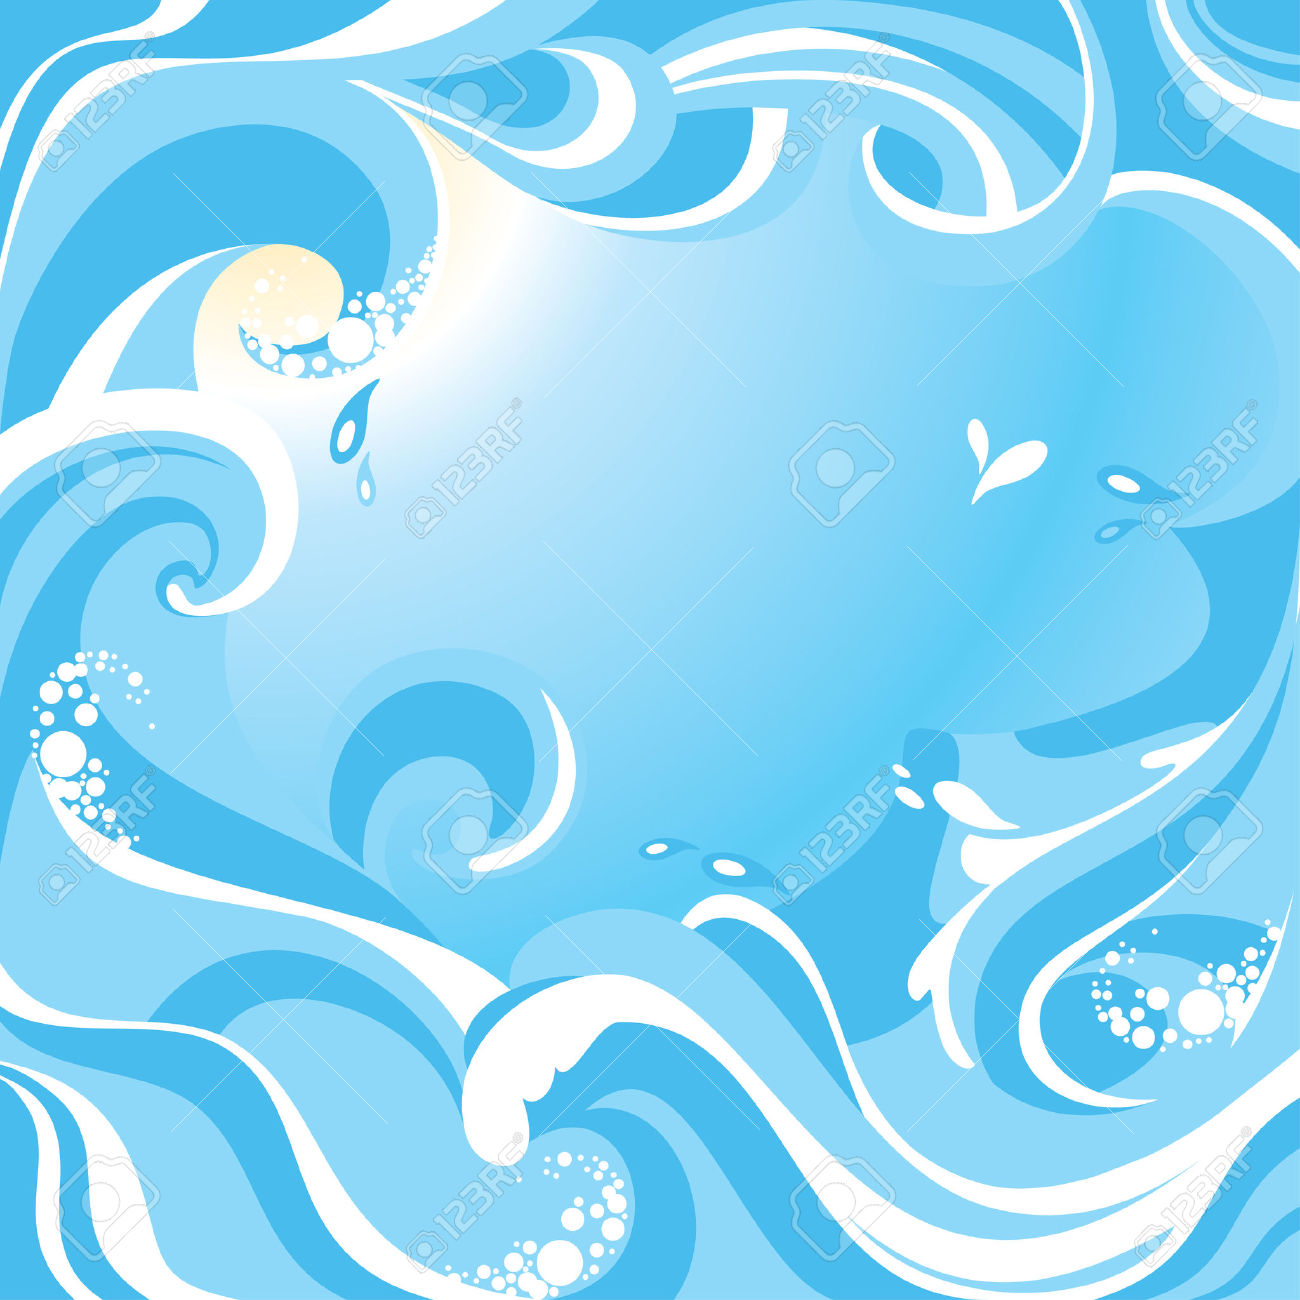 Free Ocean Background Cliparts, Download Free Clip Art, Free